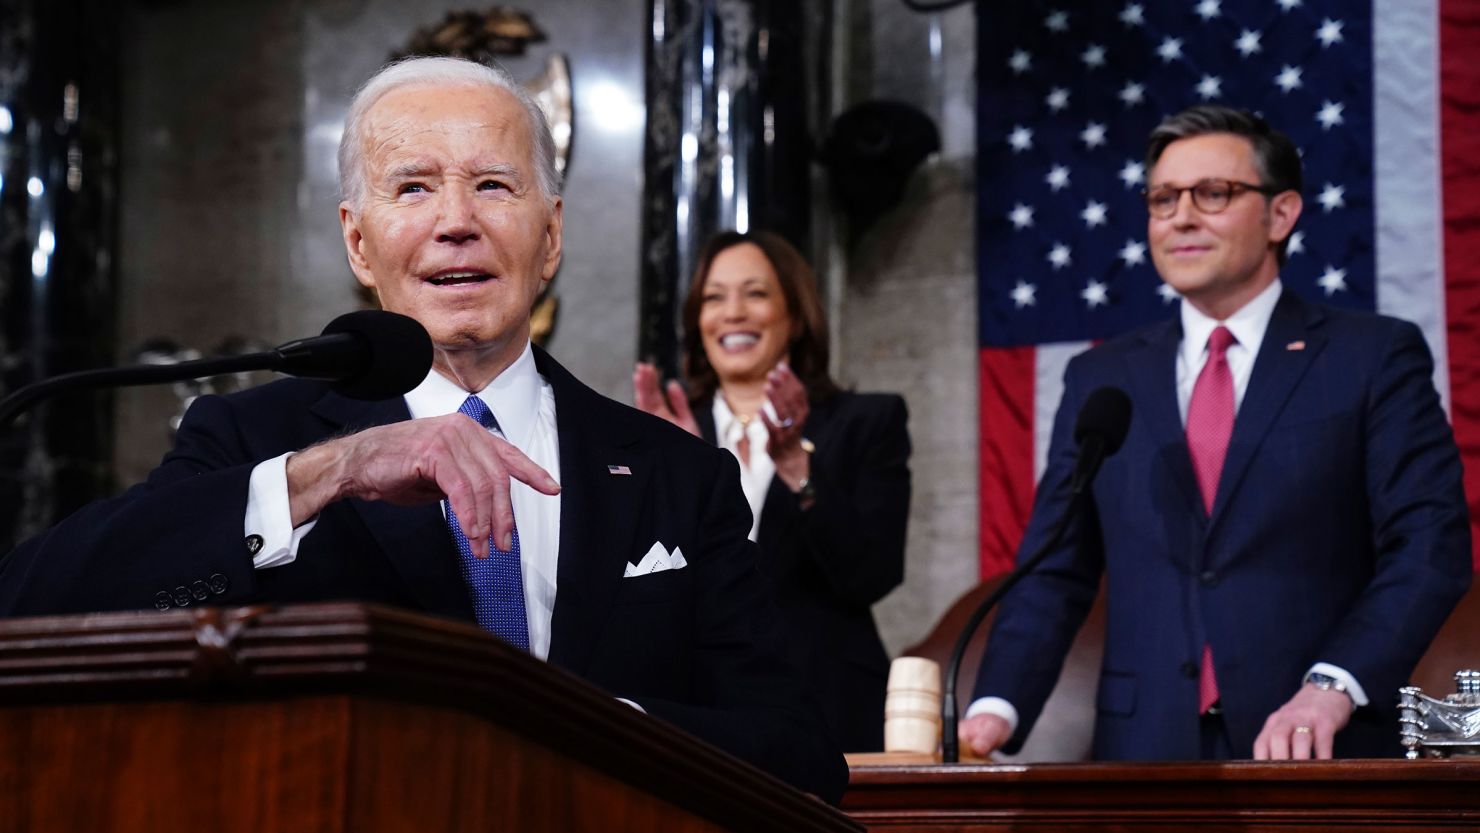 A forceful Biden hits the road as Republicans keep focus on his age and